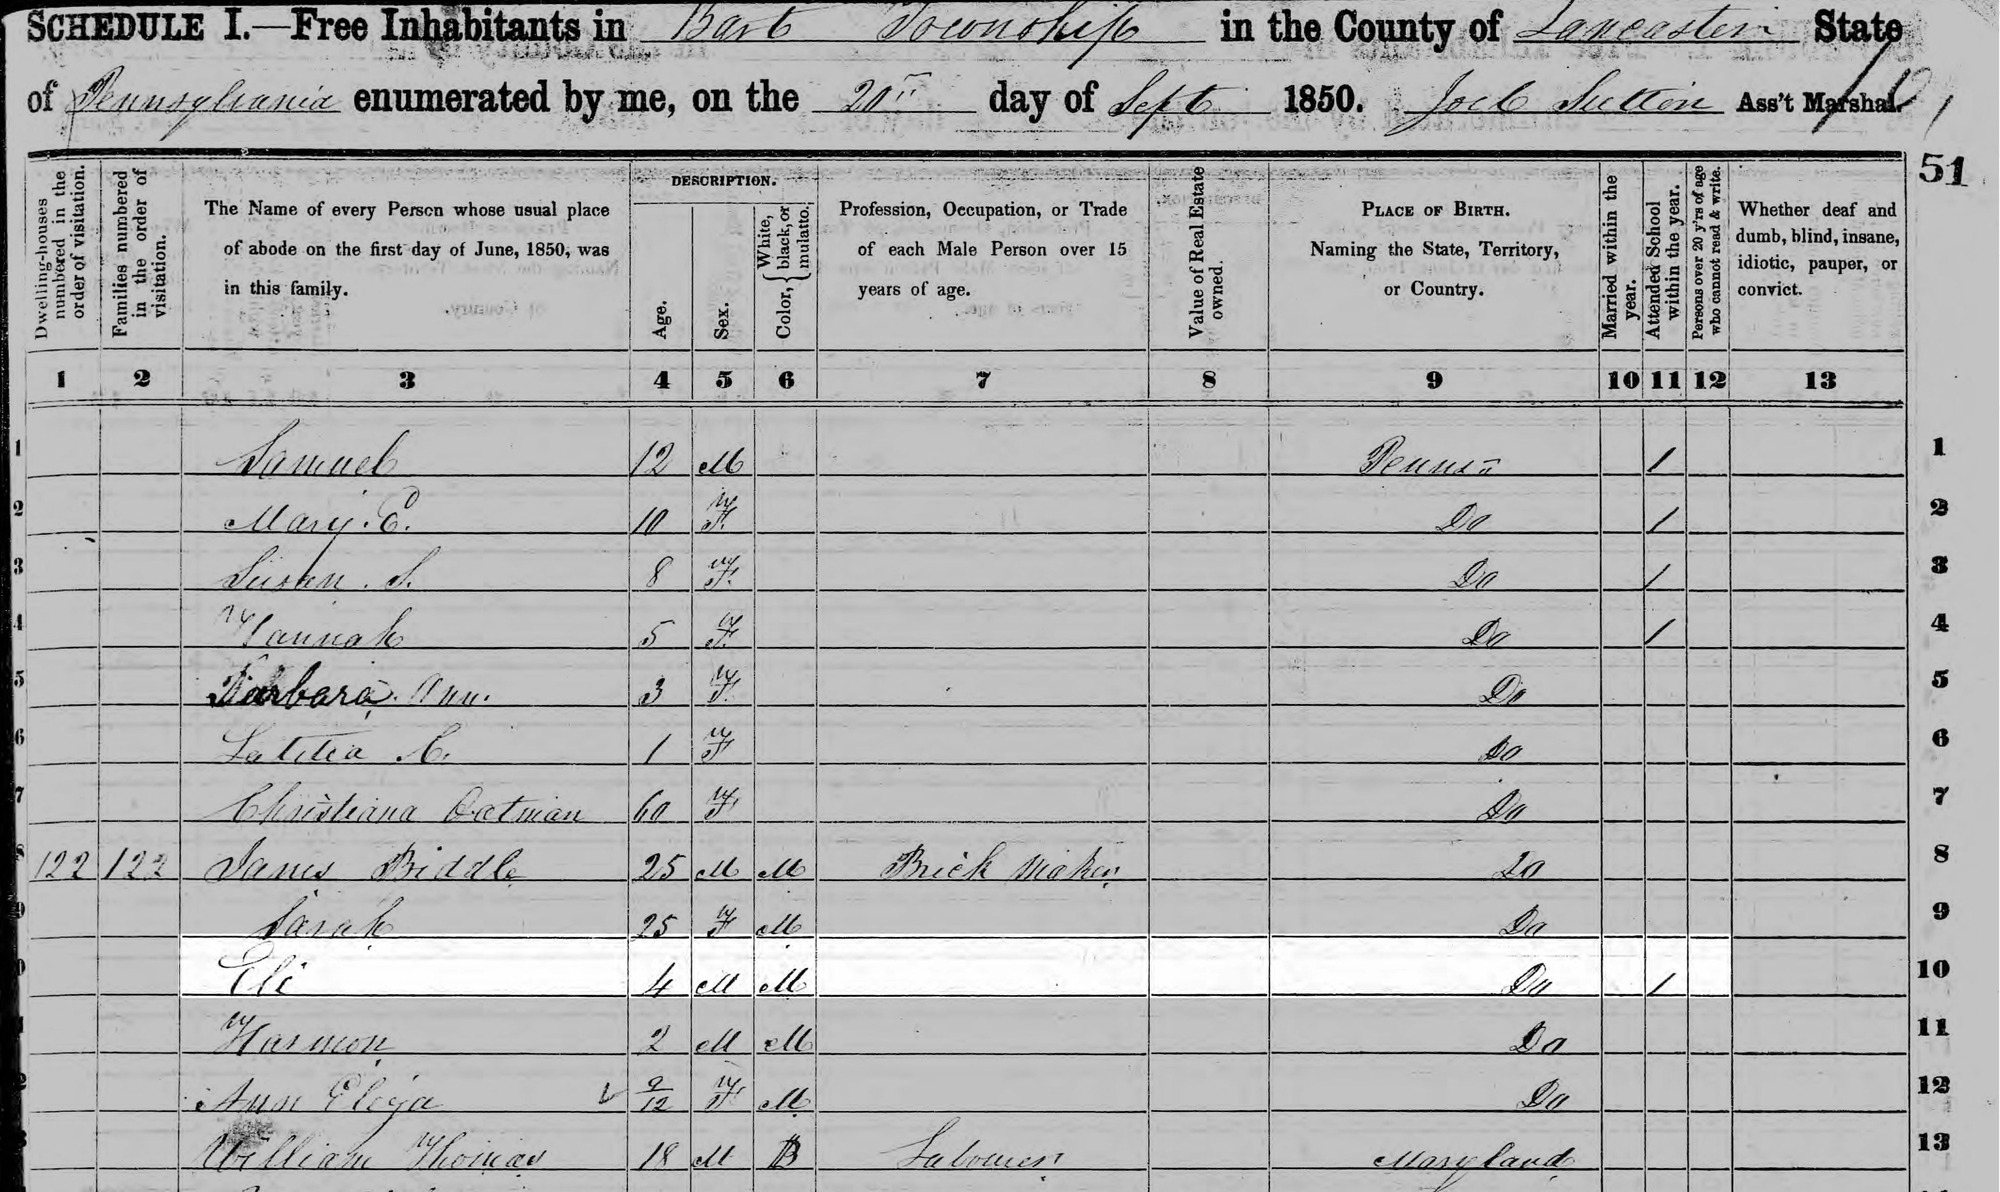 1850 federal census enumerated on September 20th of free inhabitants in Bart Township in Lancaster County in Pennsylvania. The Biddle family is towards the bottom of the page, with the 4-year-old Eli Biddle highlighted.